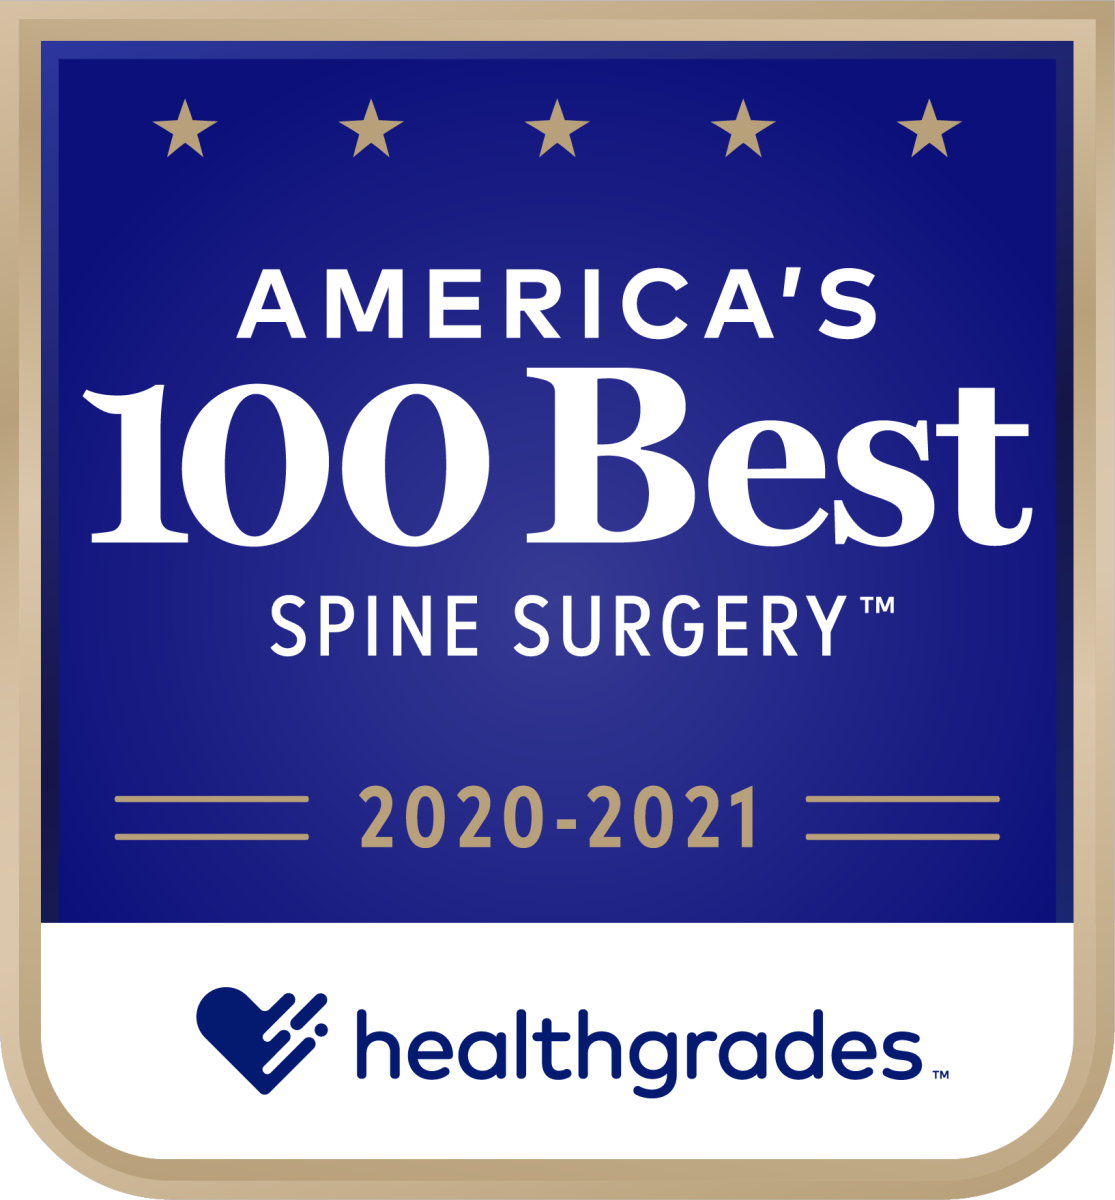 America's 100 Best Spine Surgery 2020 to 2021